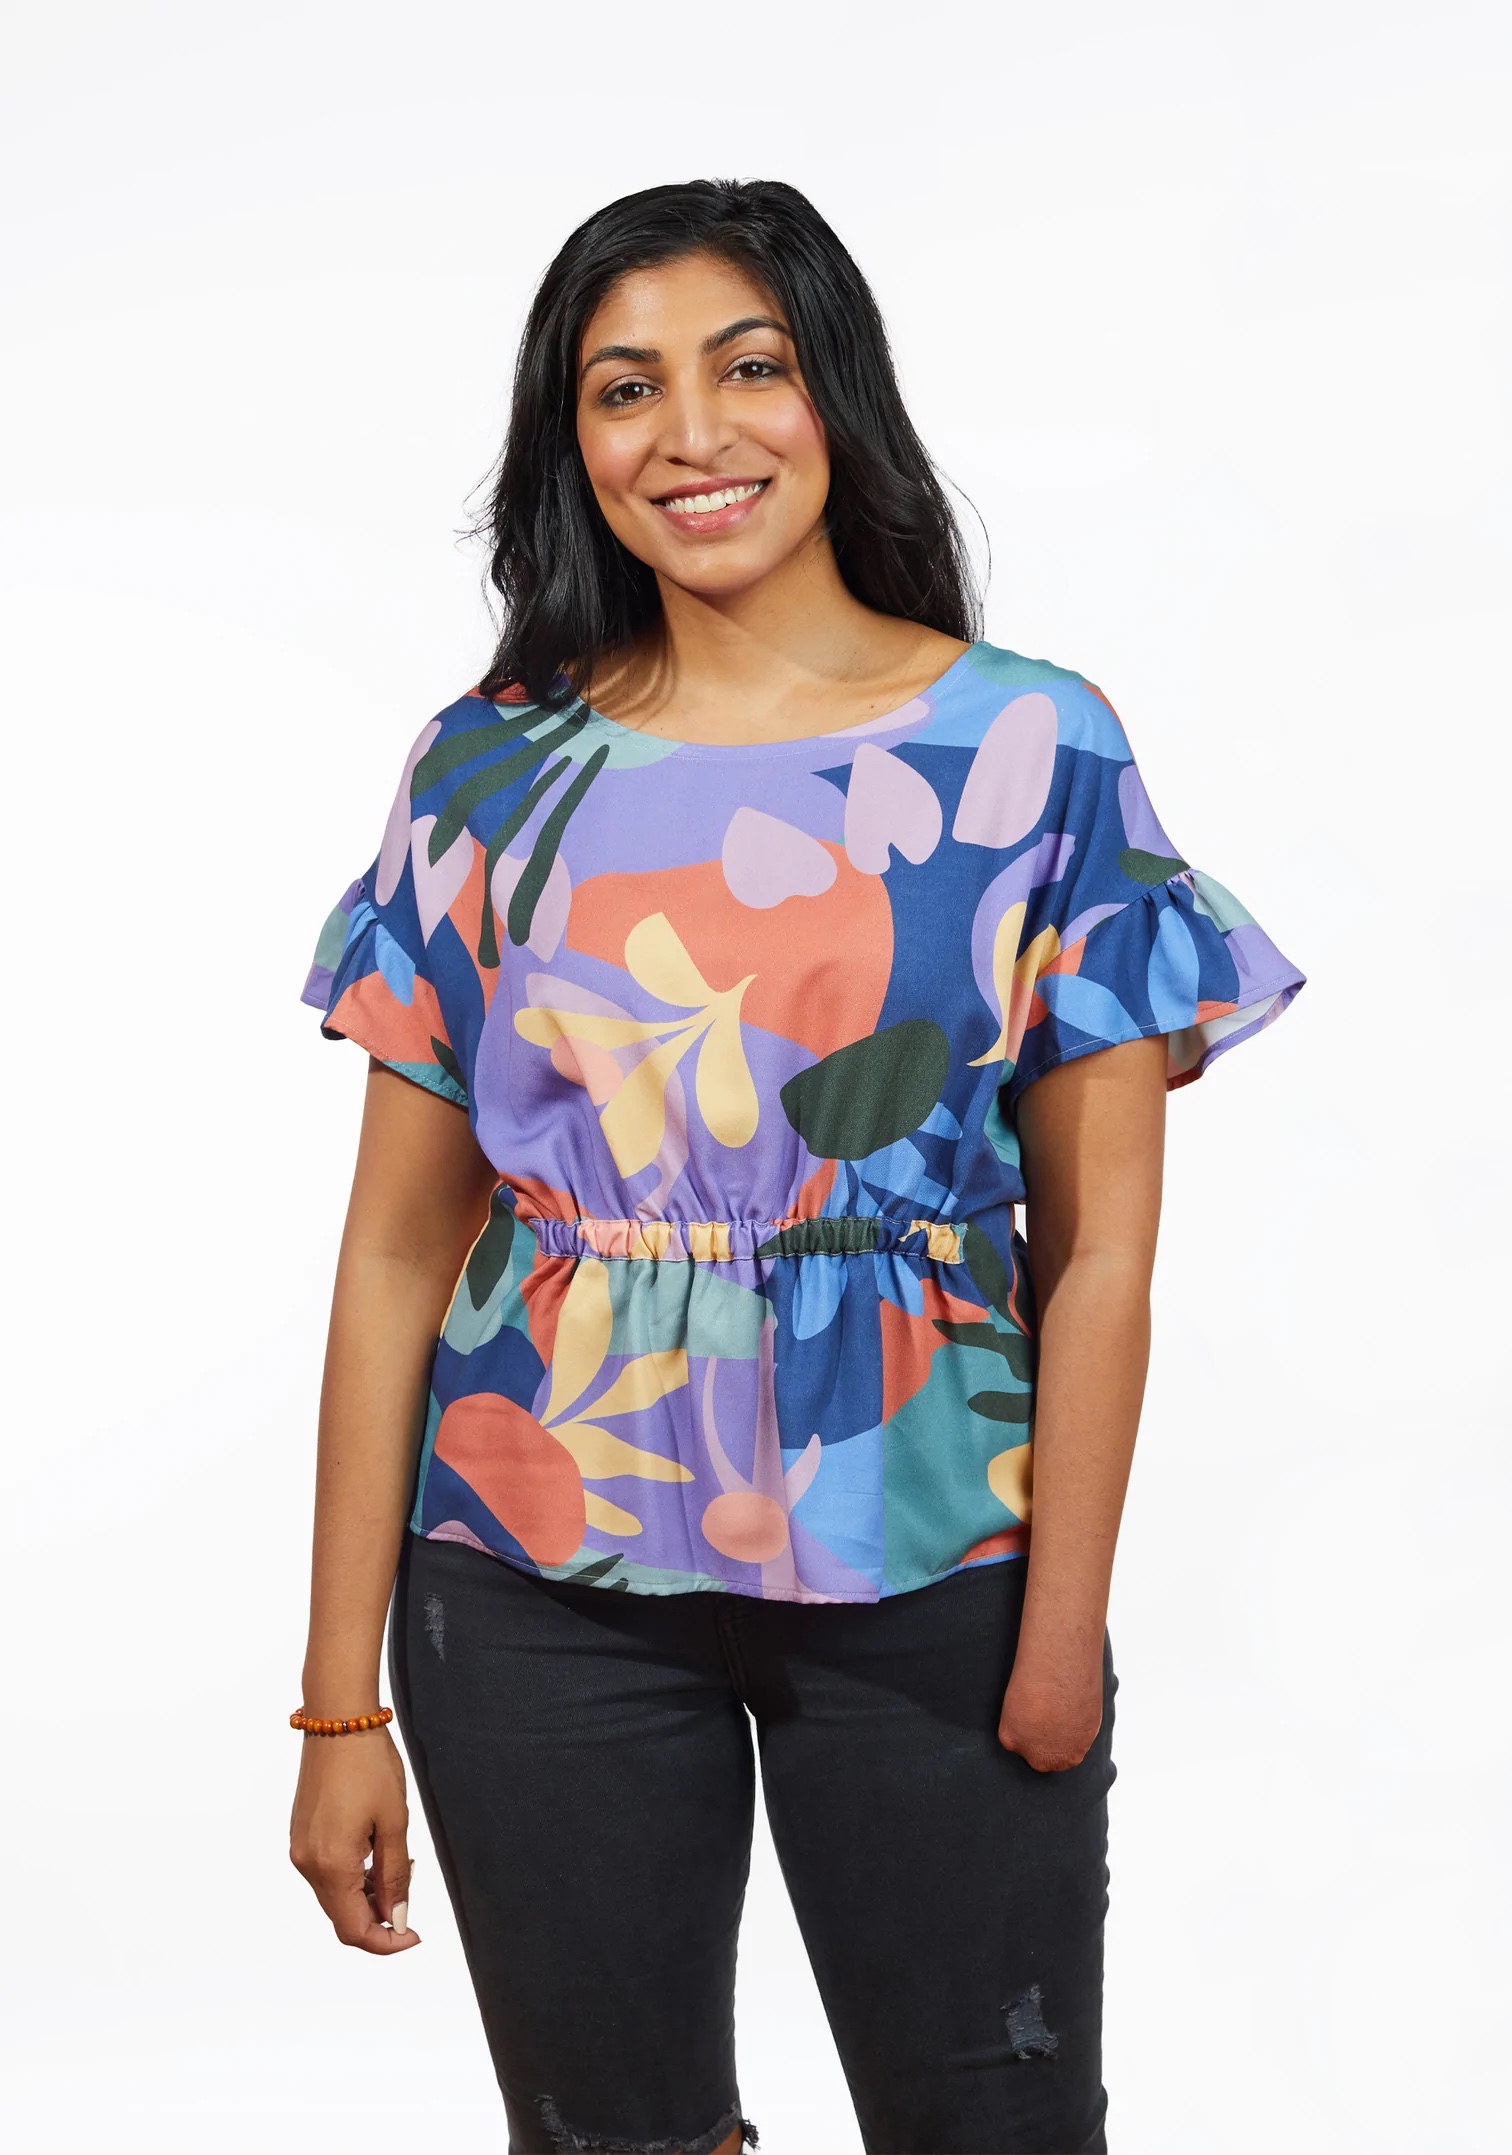 Woman wearing the Corin Top sewing pattern from Grainline Studio on The Fold Line. A top pattern made in double gauze, charmeuse, crepe de chine, rayon or rayon blend fabrics, featuring a ruffled cap sleeve, gathered elastic waist, relaxed fit and scoop neck.